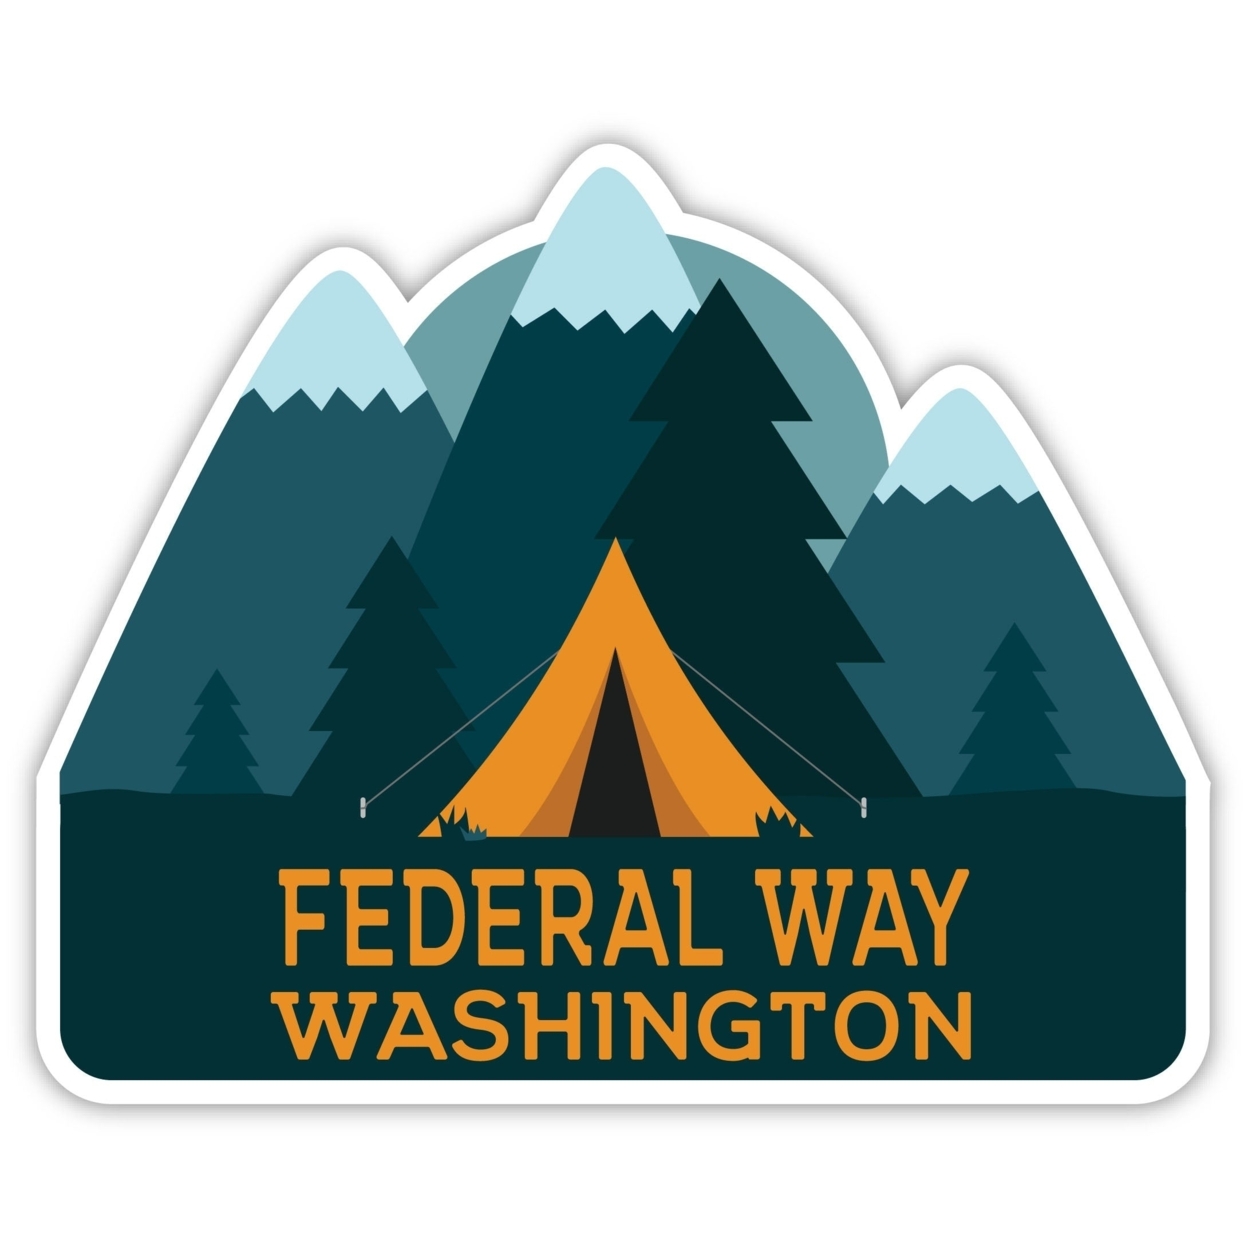 Federal Way Washington Souvenir Decorative Stickers (Choose Theme And Size) - 4-Pack, 12-Inch, Tent